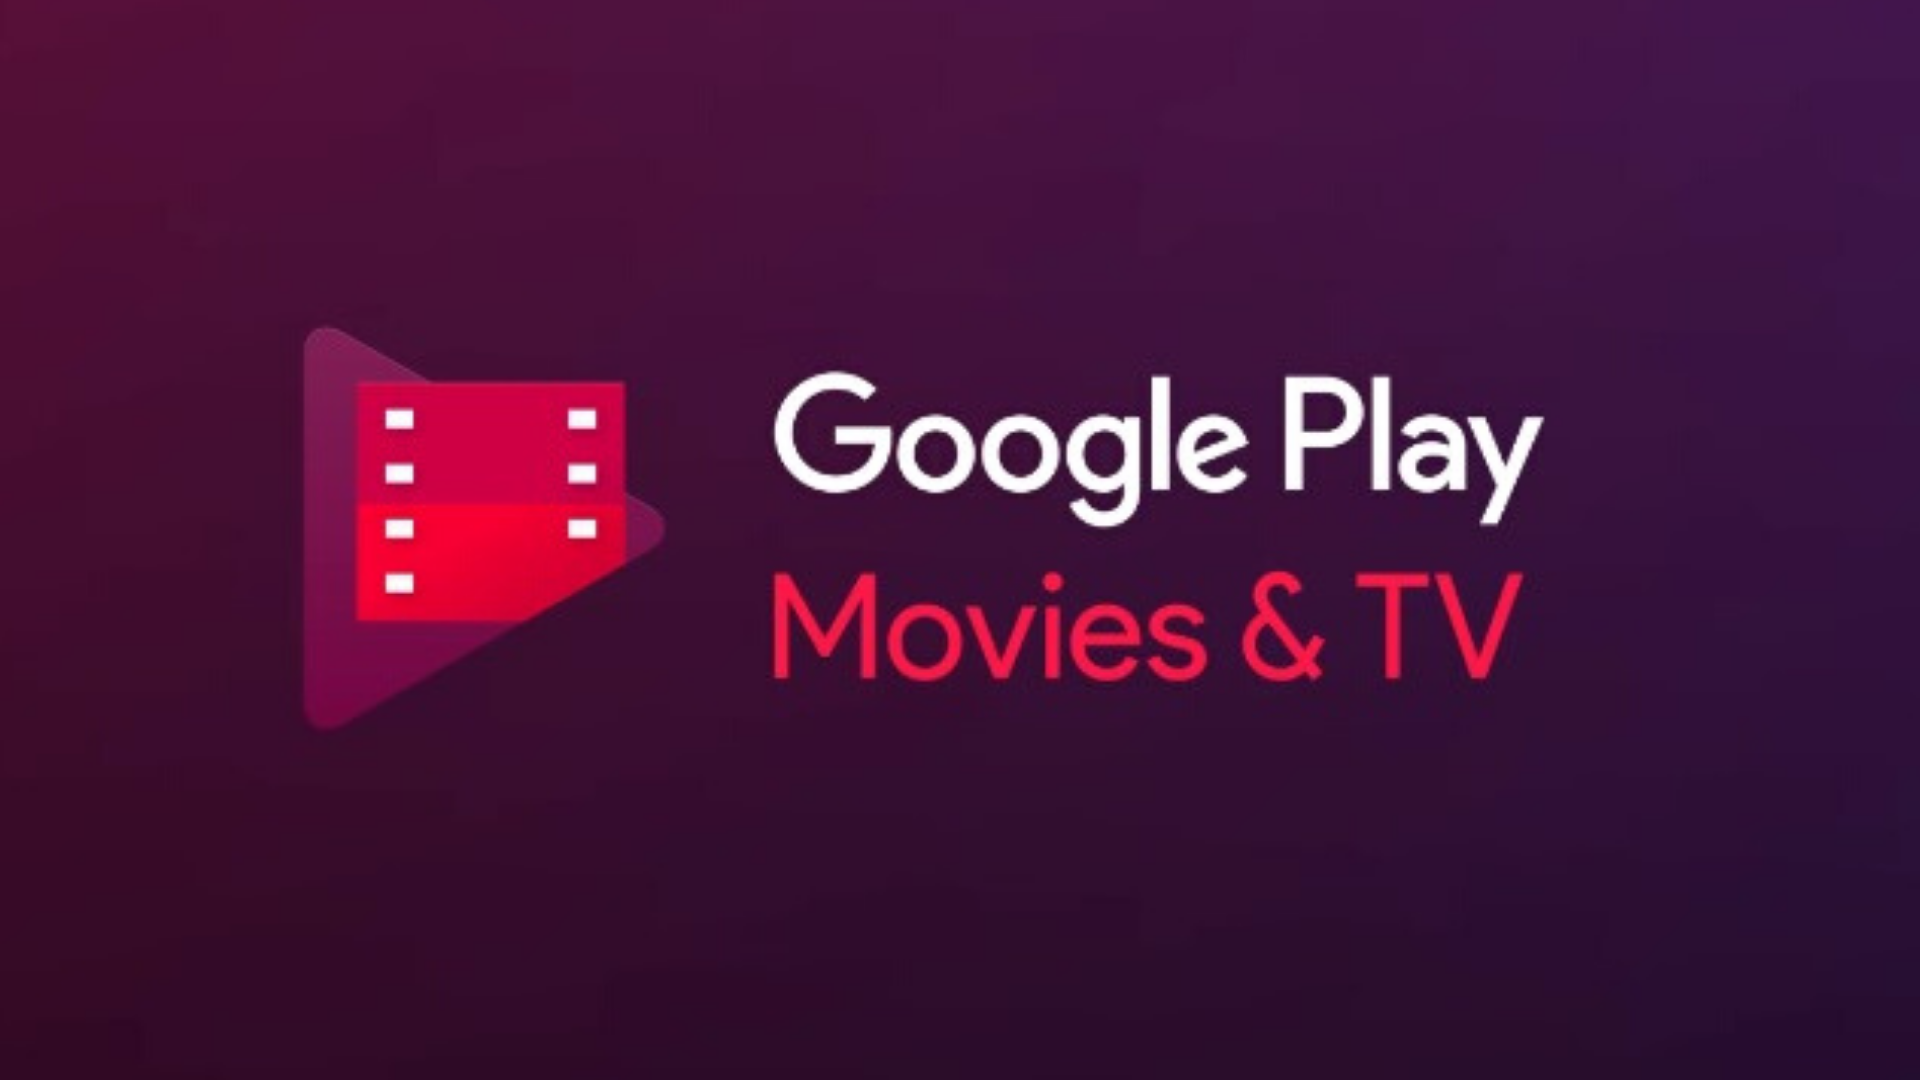 Netflix’s Streaming Quality Cuts, Google Play Movies could offer ad-supported movie streaming for free and other top news